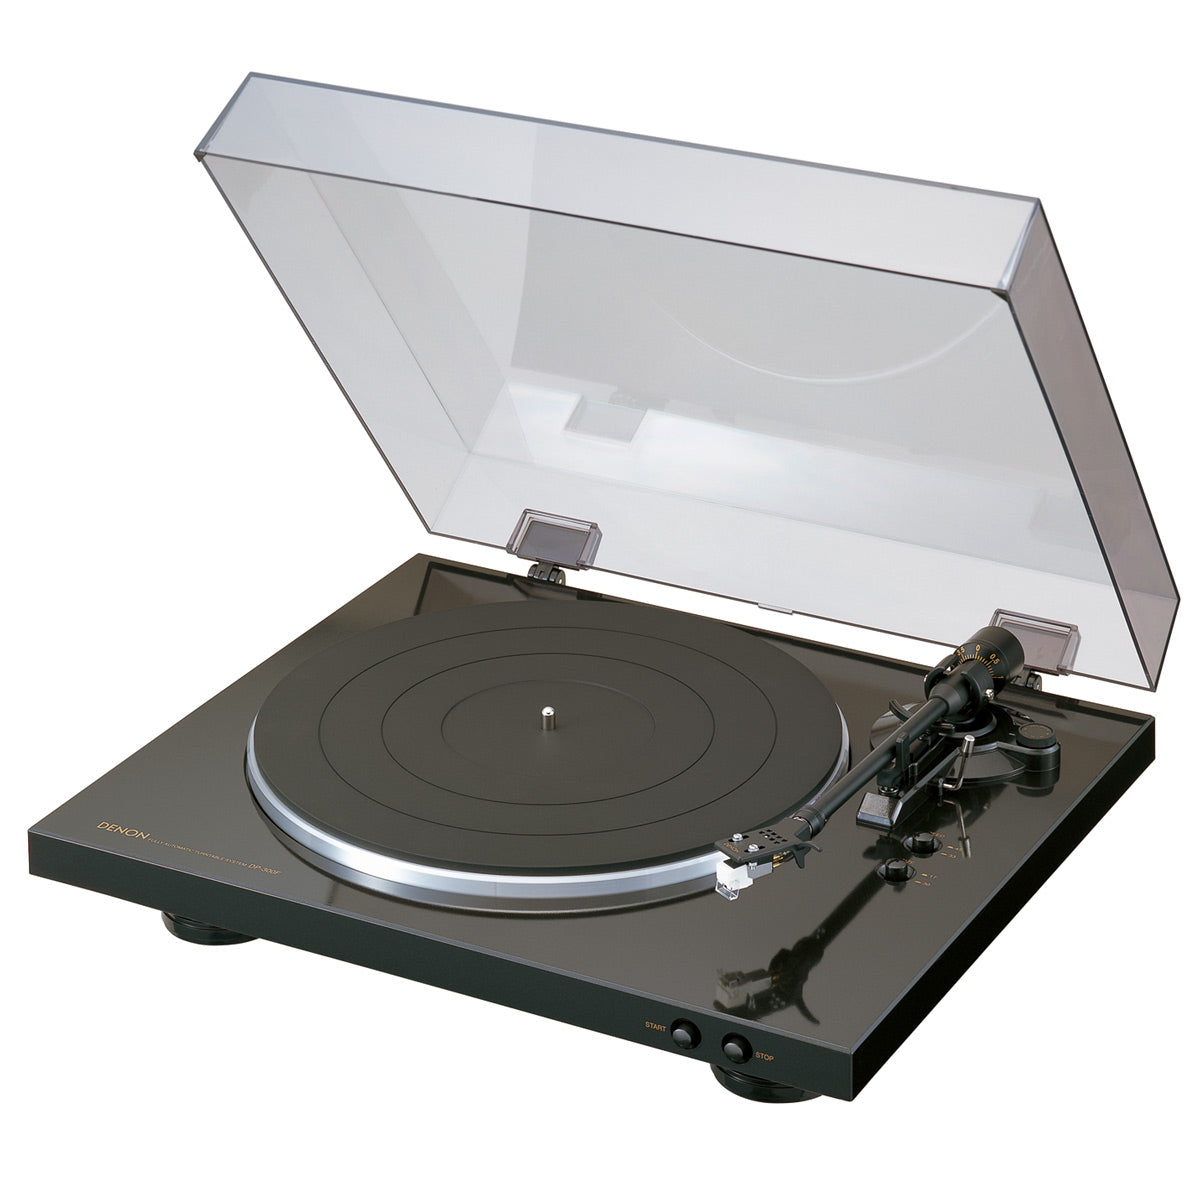 Technics Turntable, Premium Class HiFi Record Player with Coreless Direct,  Stable Playback, Audiophile-Grade Cartridge and Auto-Lift Tonearm